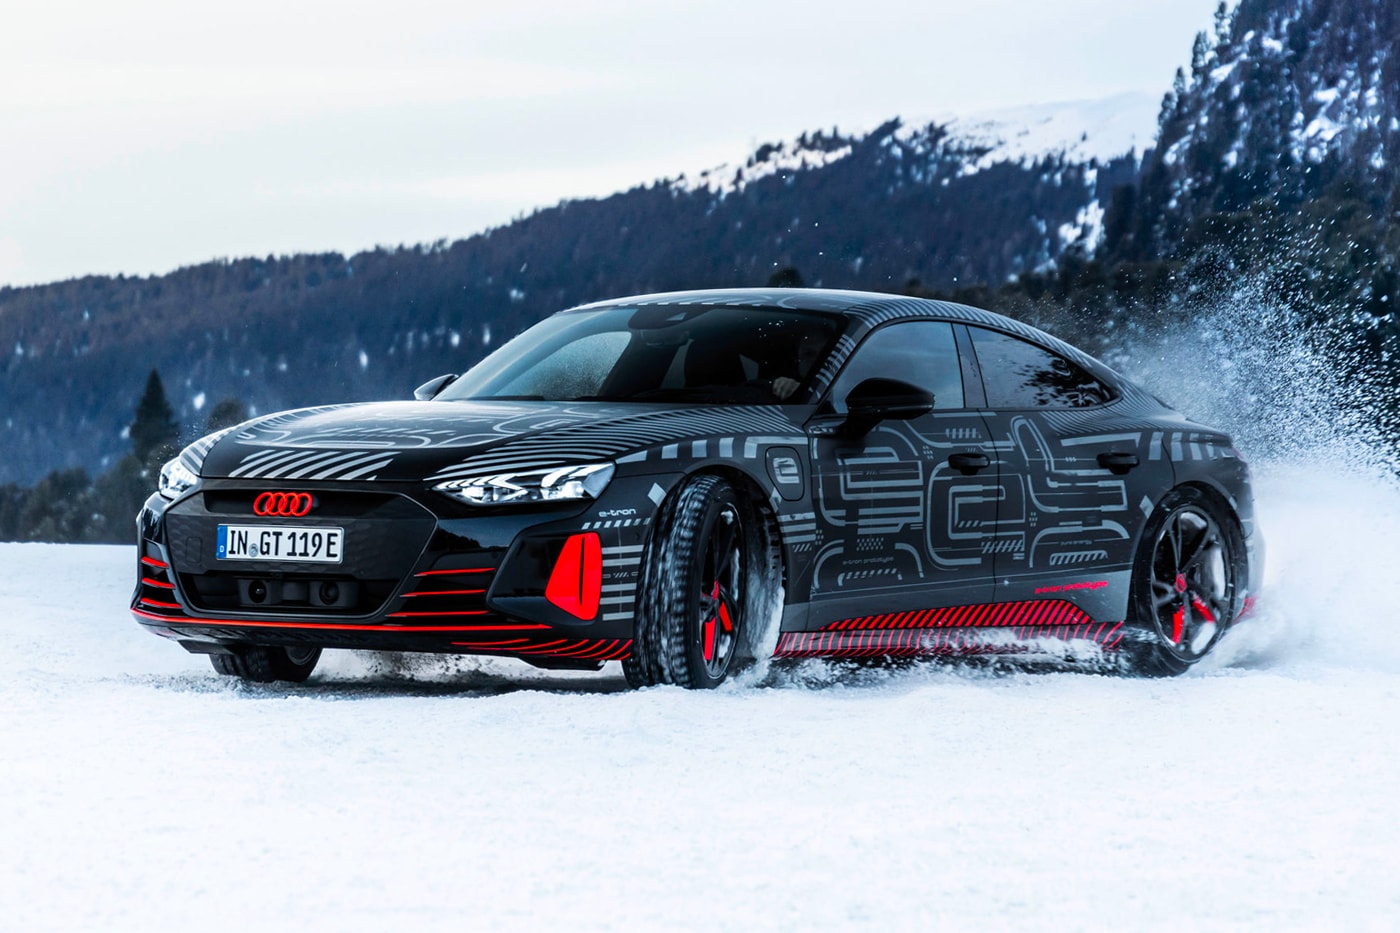 Audi's Electric e-tron GT Sports Car Is Set for a World Premiere on February 9 Marc Lichte r8 sports cars supercars taycan porsche tesla 